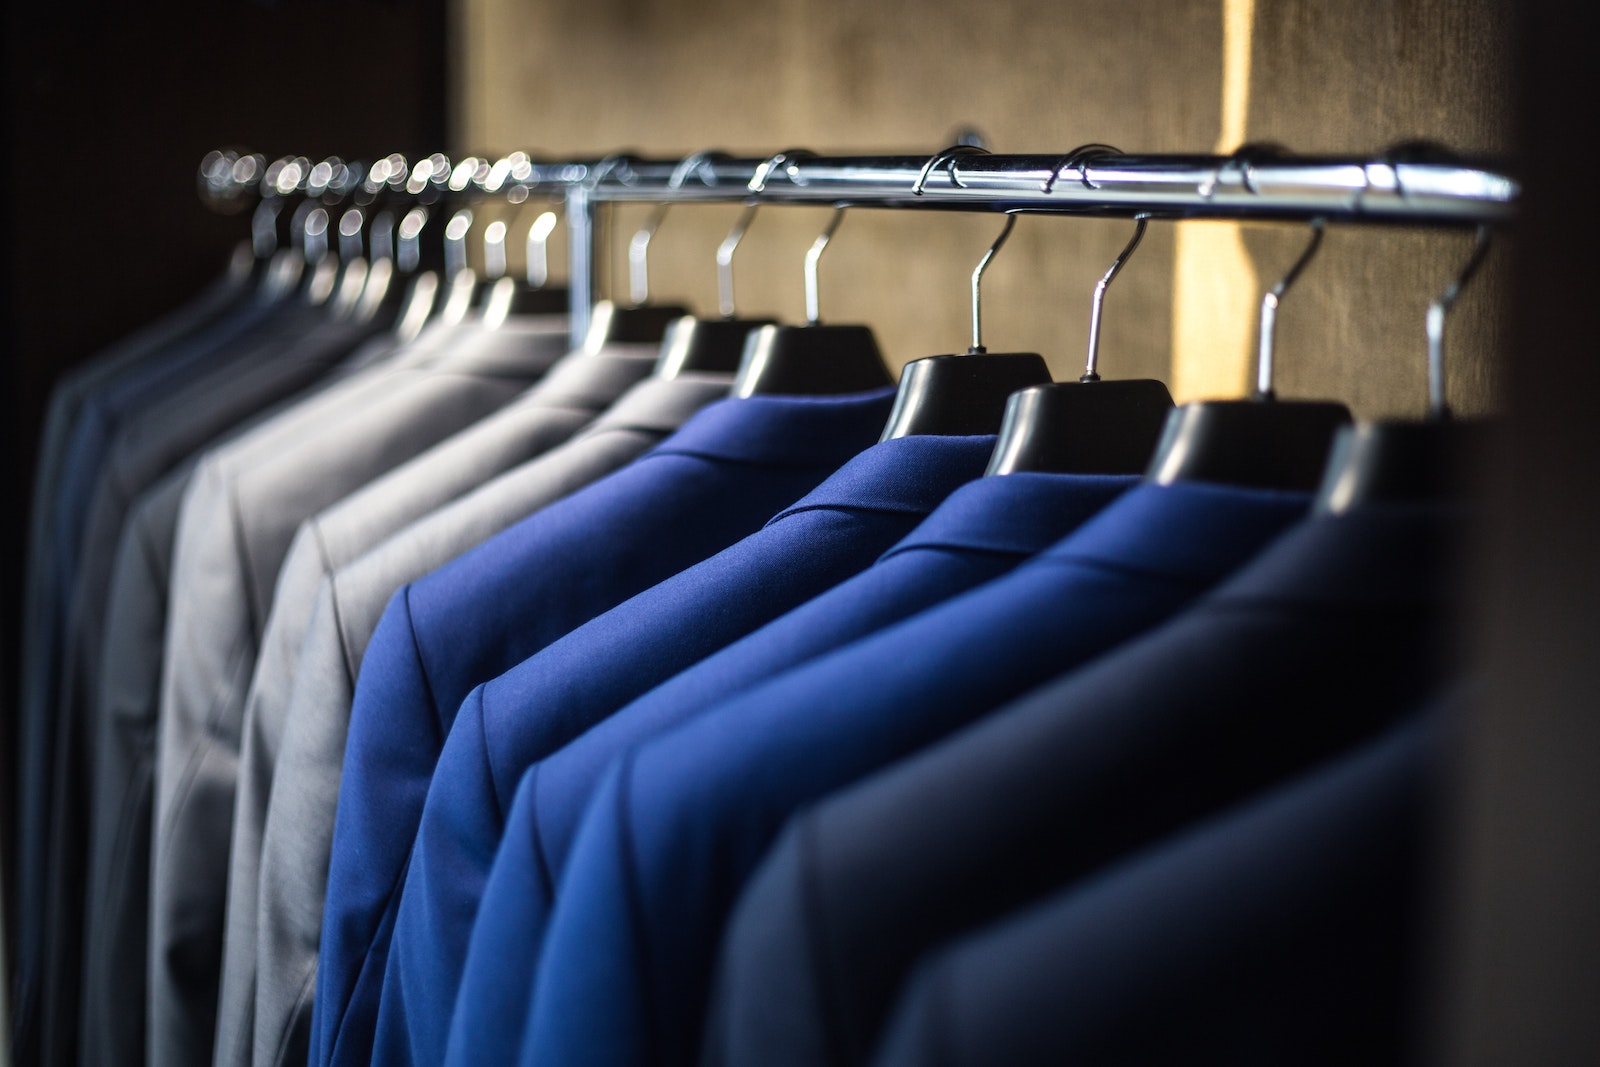 Men's suits hanging in a row